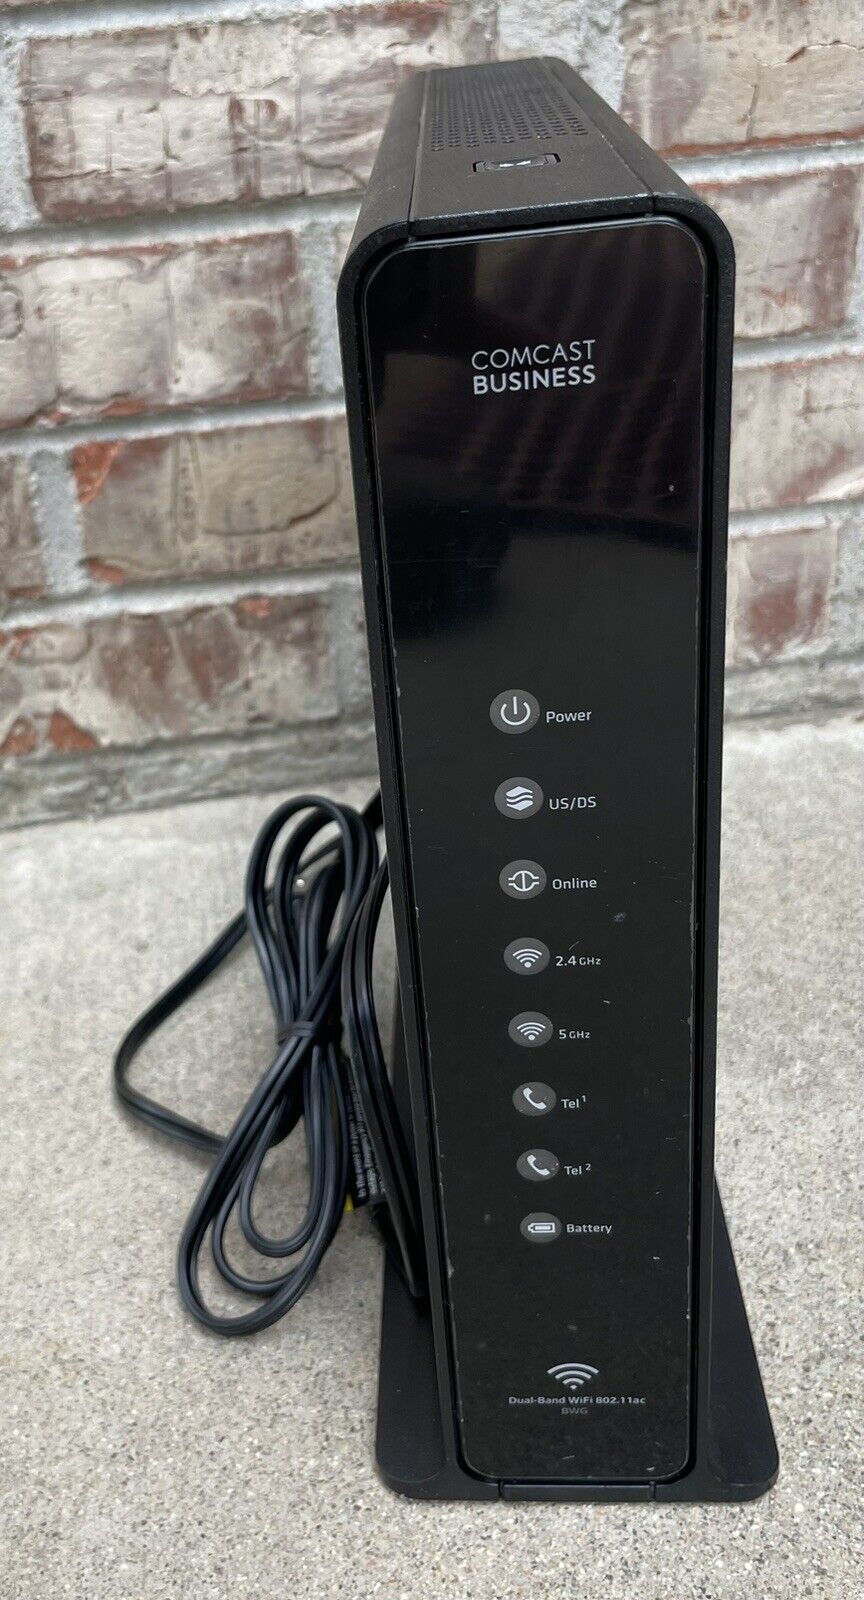 COMCAST Business Dual Band Wifi BWG Model Cable Modem Router TESTED